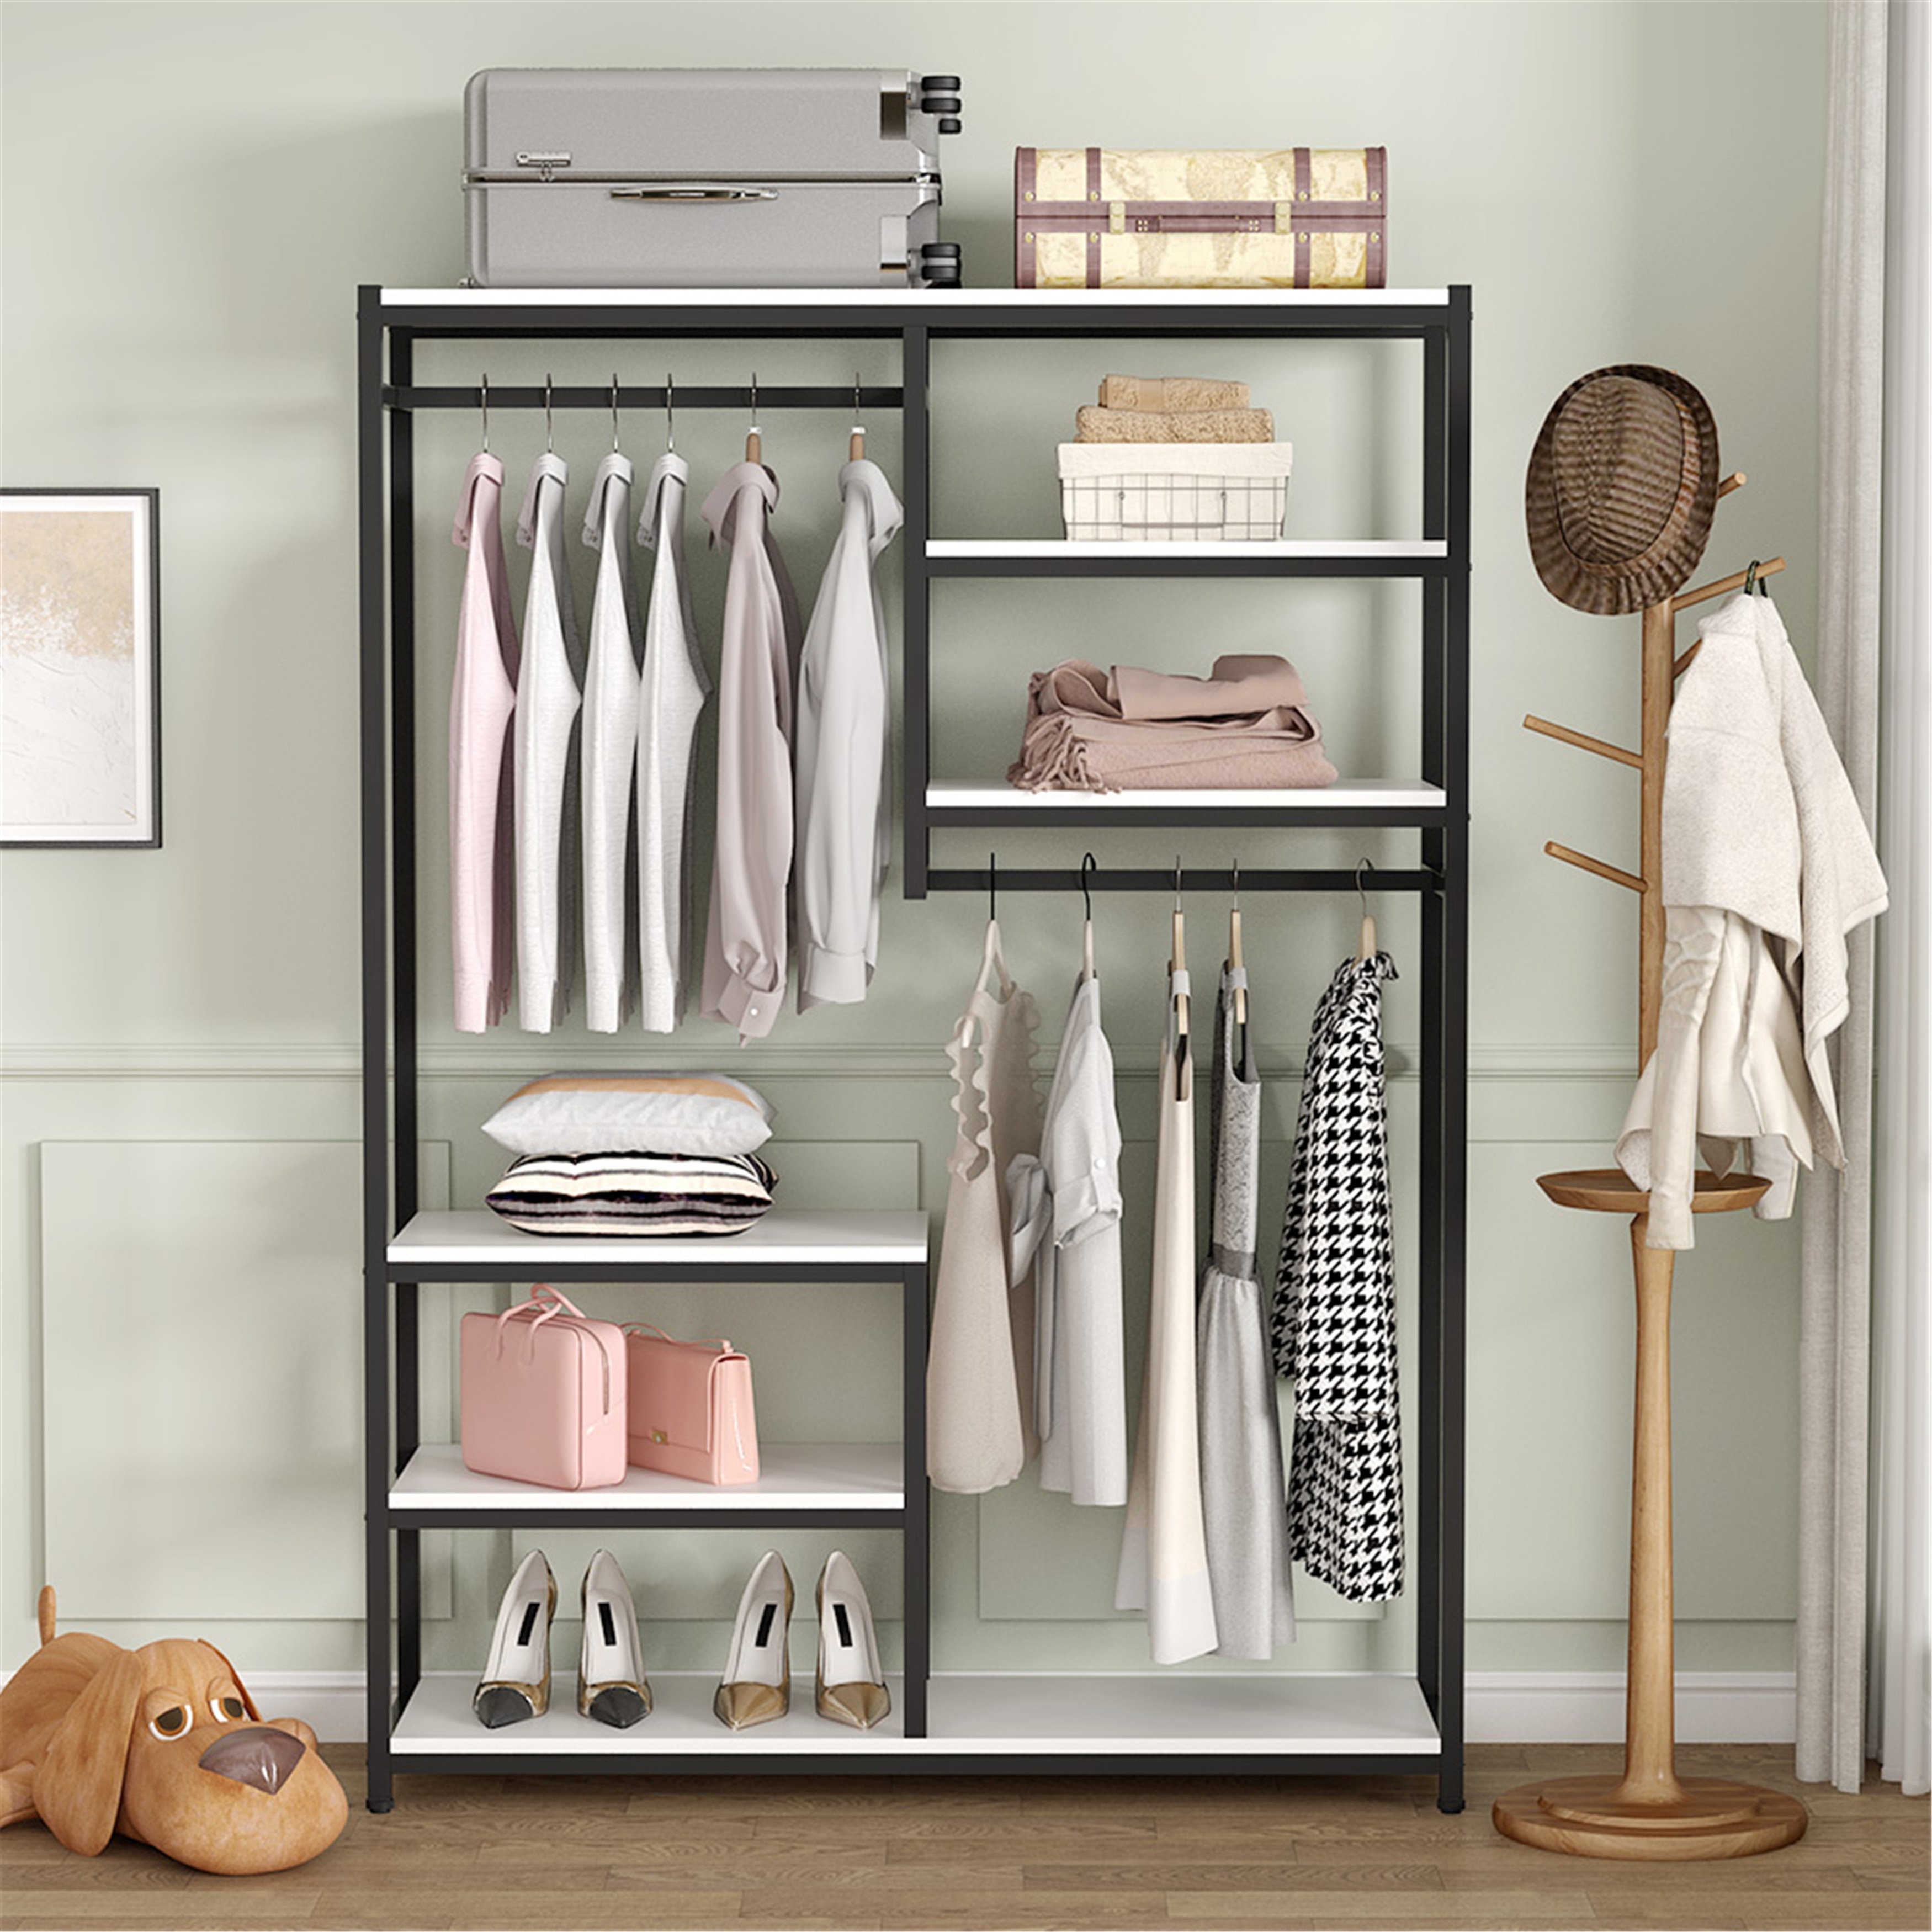 https://ak1.ostkcdn.com/images/products/is/images/direct/a3e05f837e6a94ca5eee4368231f620e14c007e0/Free-Standing-Closet-Organizer-Double-Hanging-Rod-Clothes-Garment-Racks.jpg